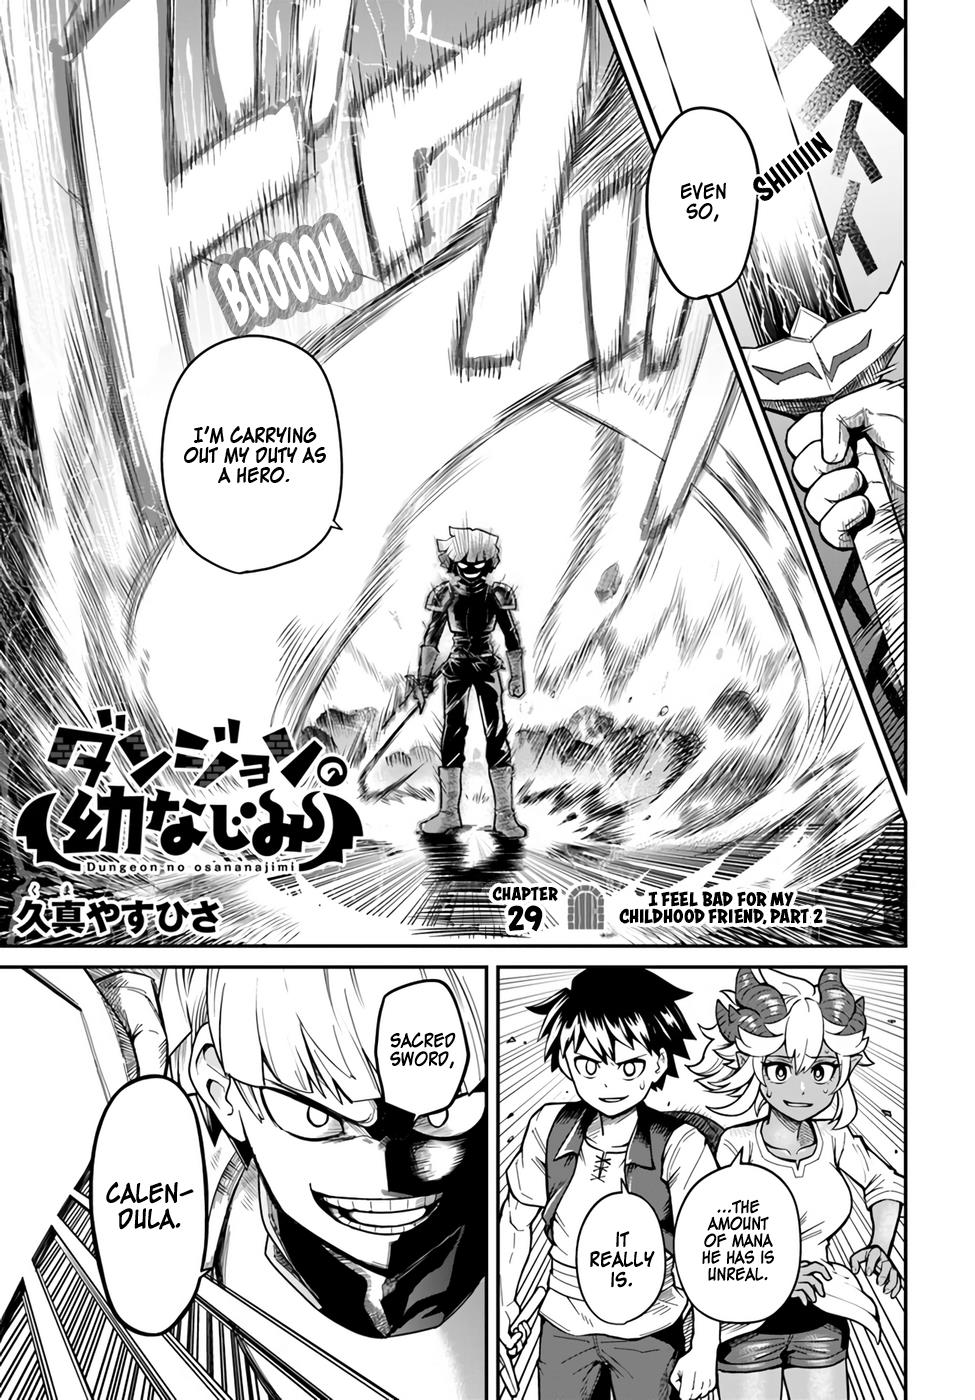 Dungeon No Osananajimi Chapter 29.2: I Feel Bad For My Childhood Friend, Part 2 - Picture 1